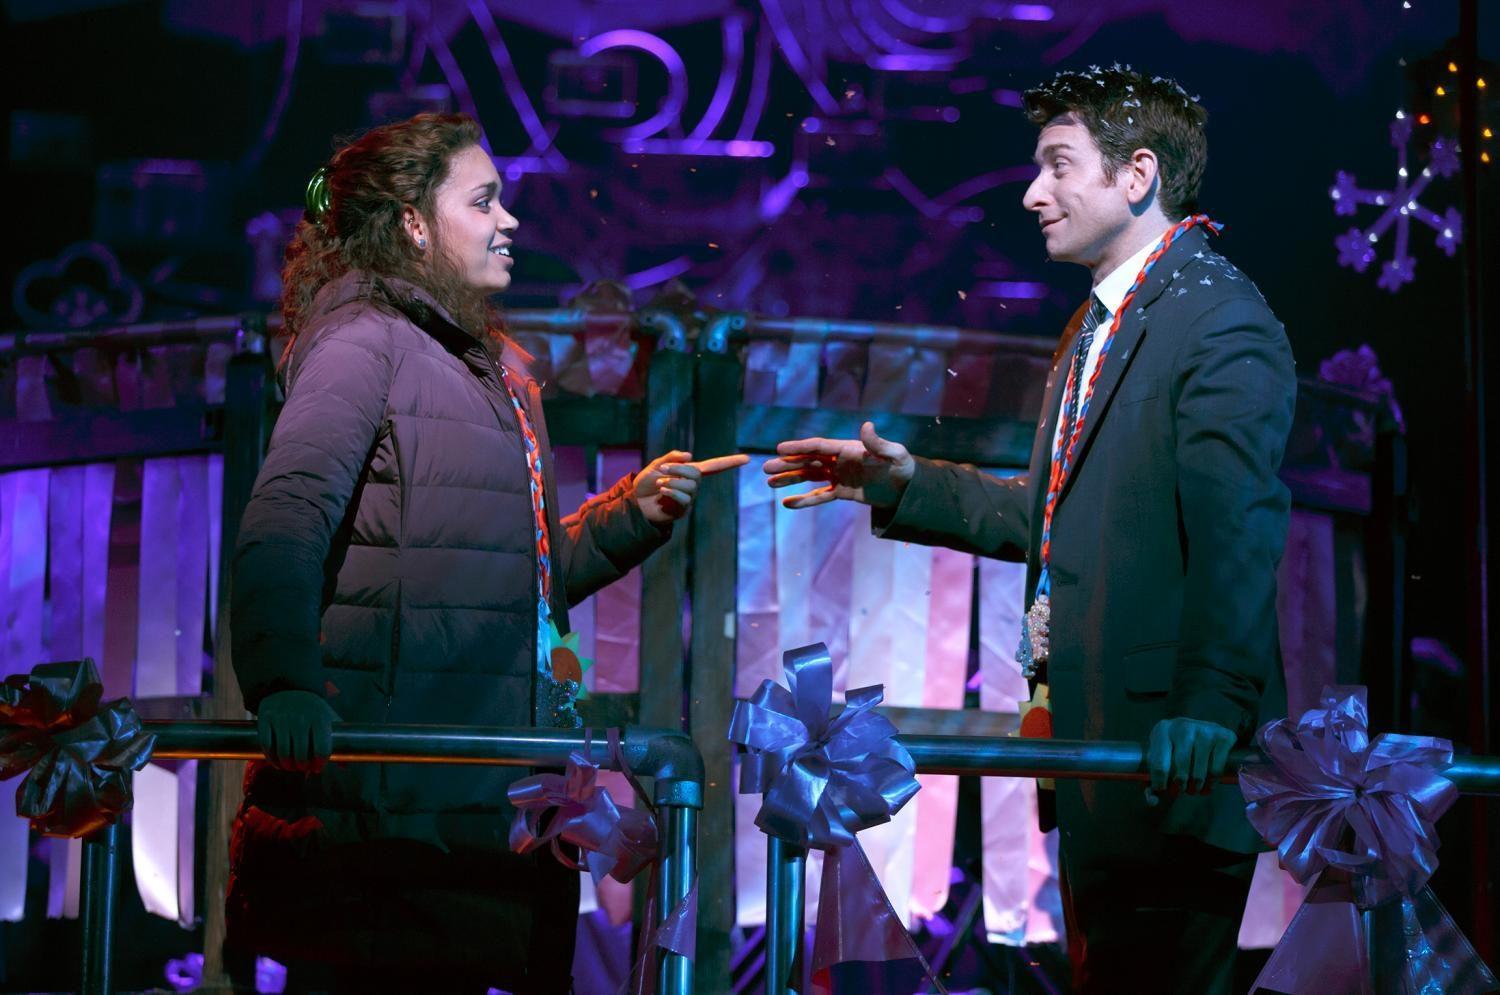 Barrett Doss and Andy Karl star in Matthew Warchus’ stage adaptation of the classic 1993 film “Groundhog Day.”